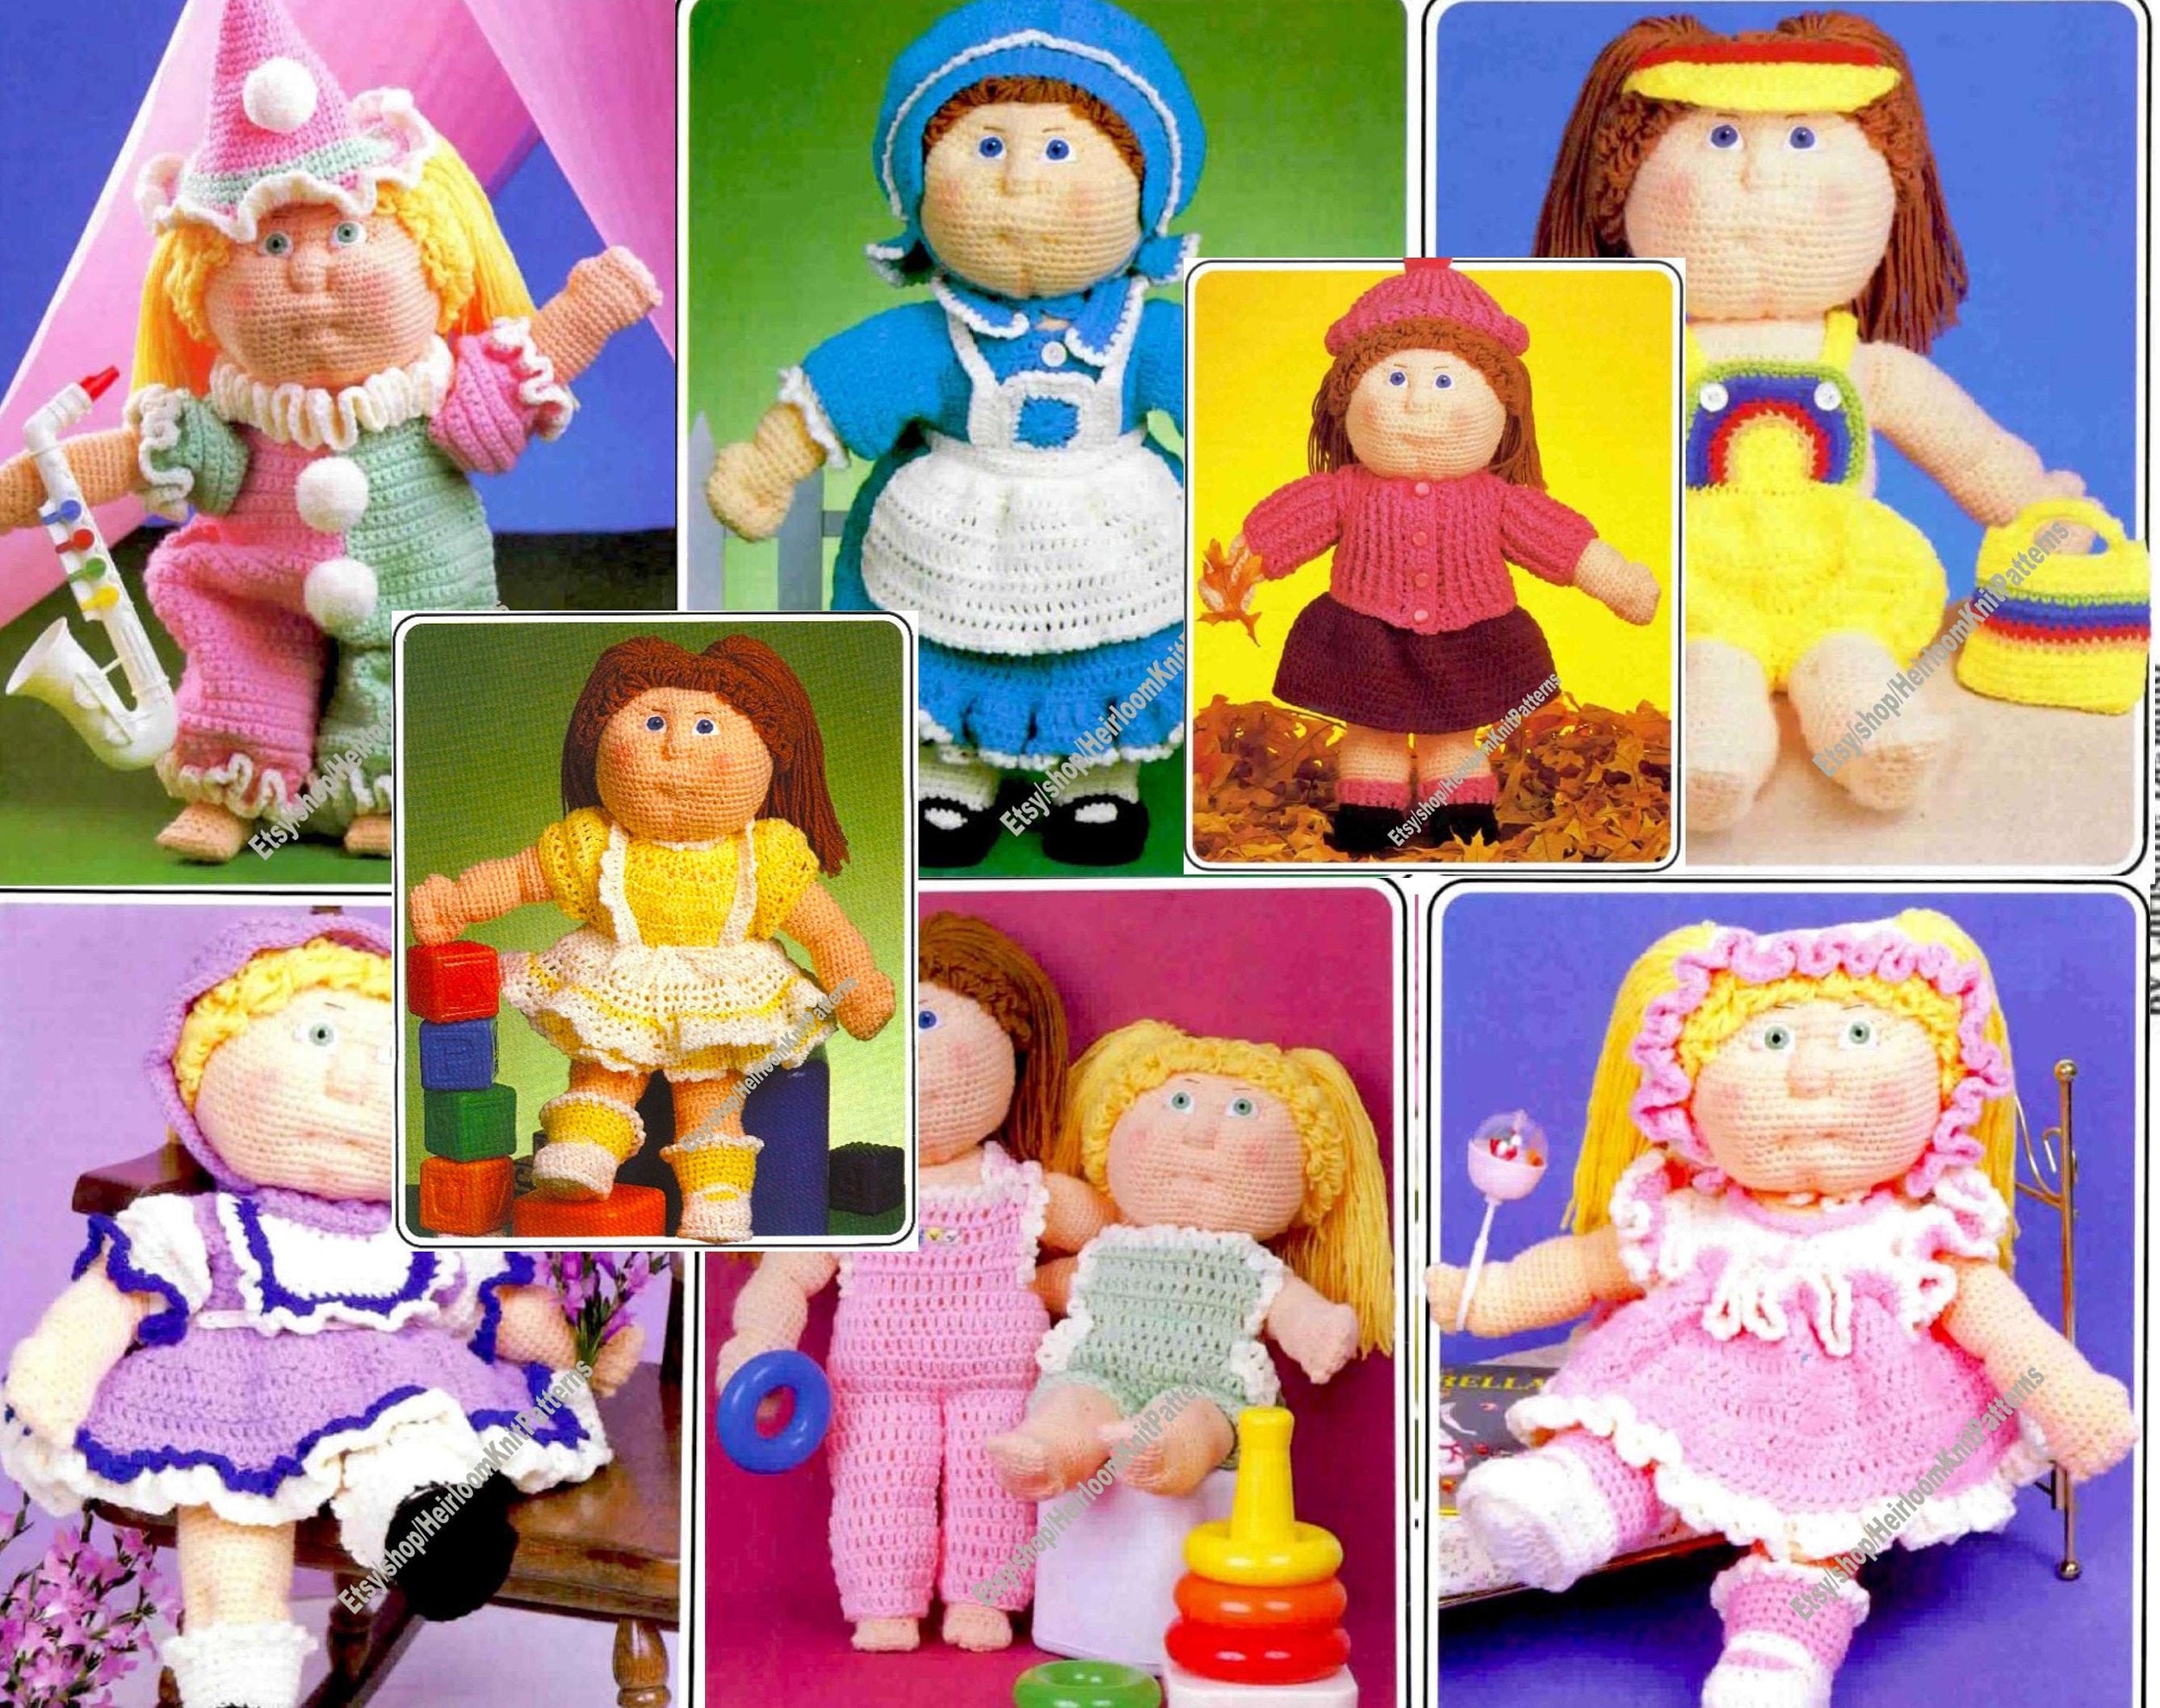 Vintage Crochet Playbabies Doll Patterns Yarn Head Baby Toothie Ruthie  Cabbage Patch Doll Designs PDF Instant Digital Download 4 Ply